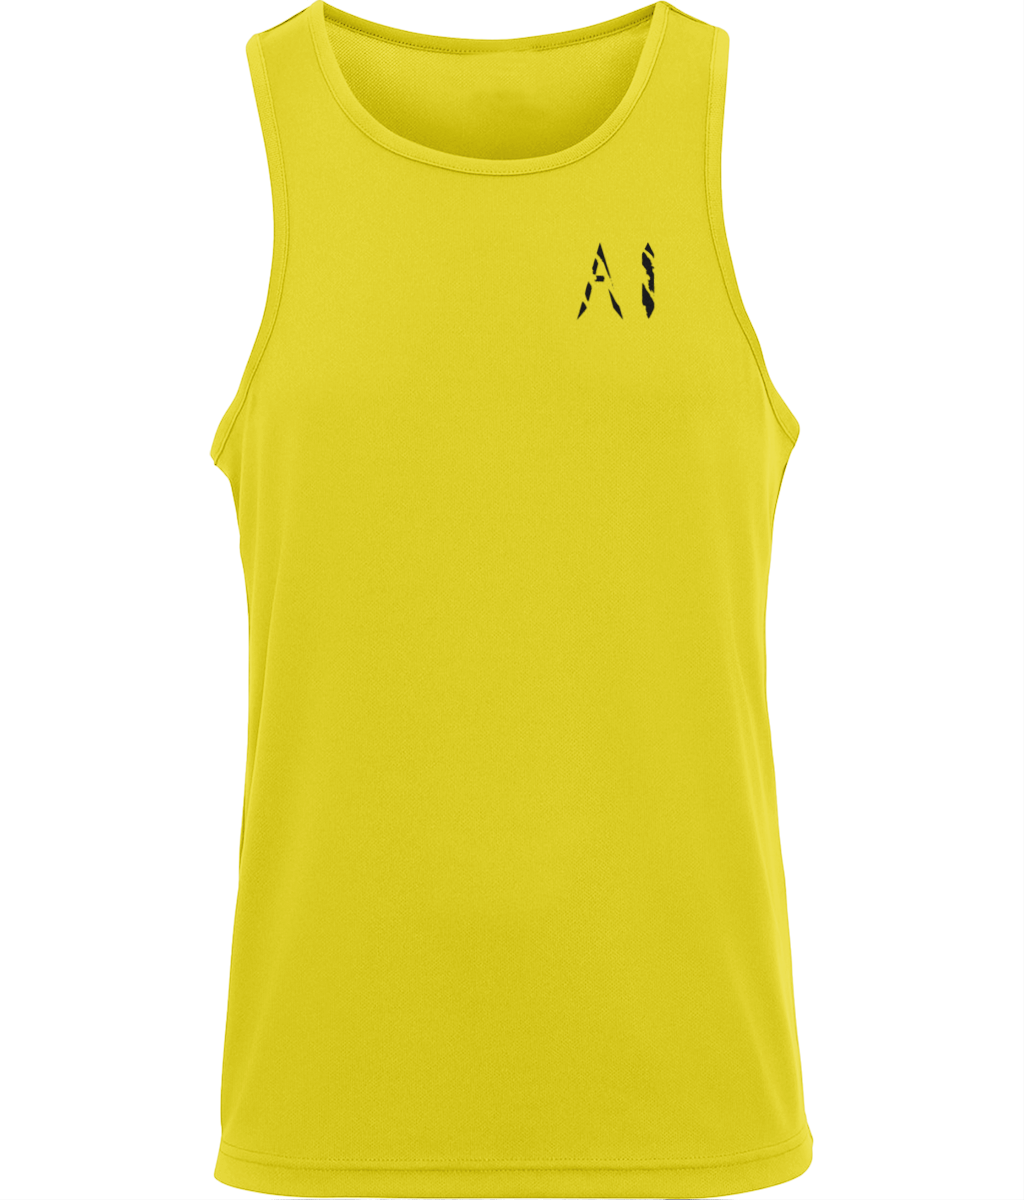 Mens Yellow Workout Sports Vest with black AI logo written on the left chest